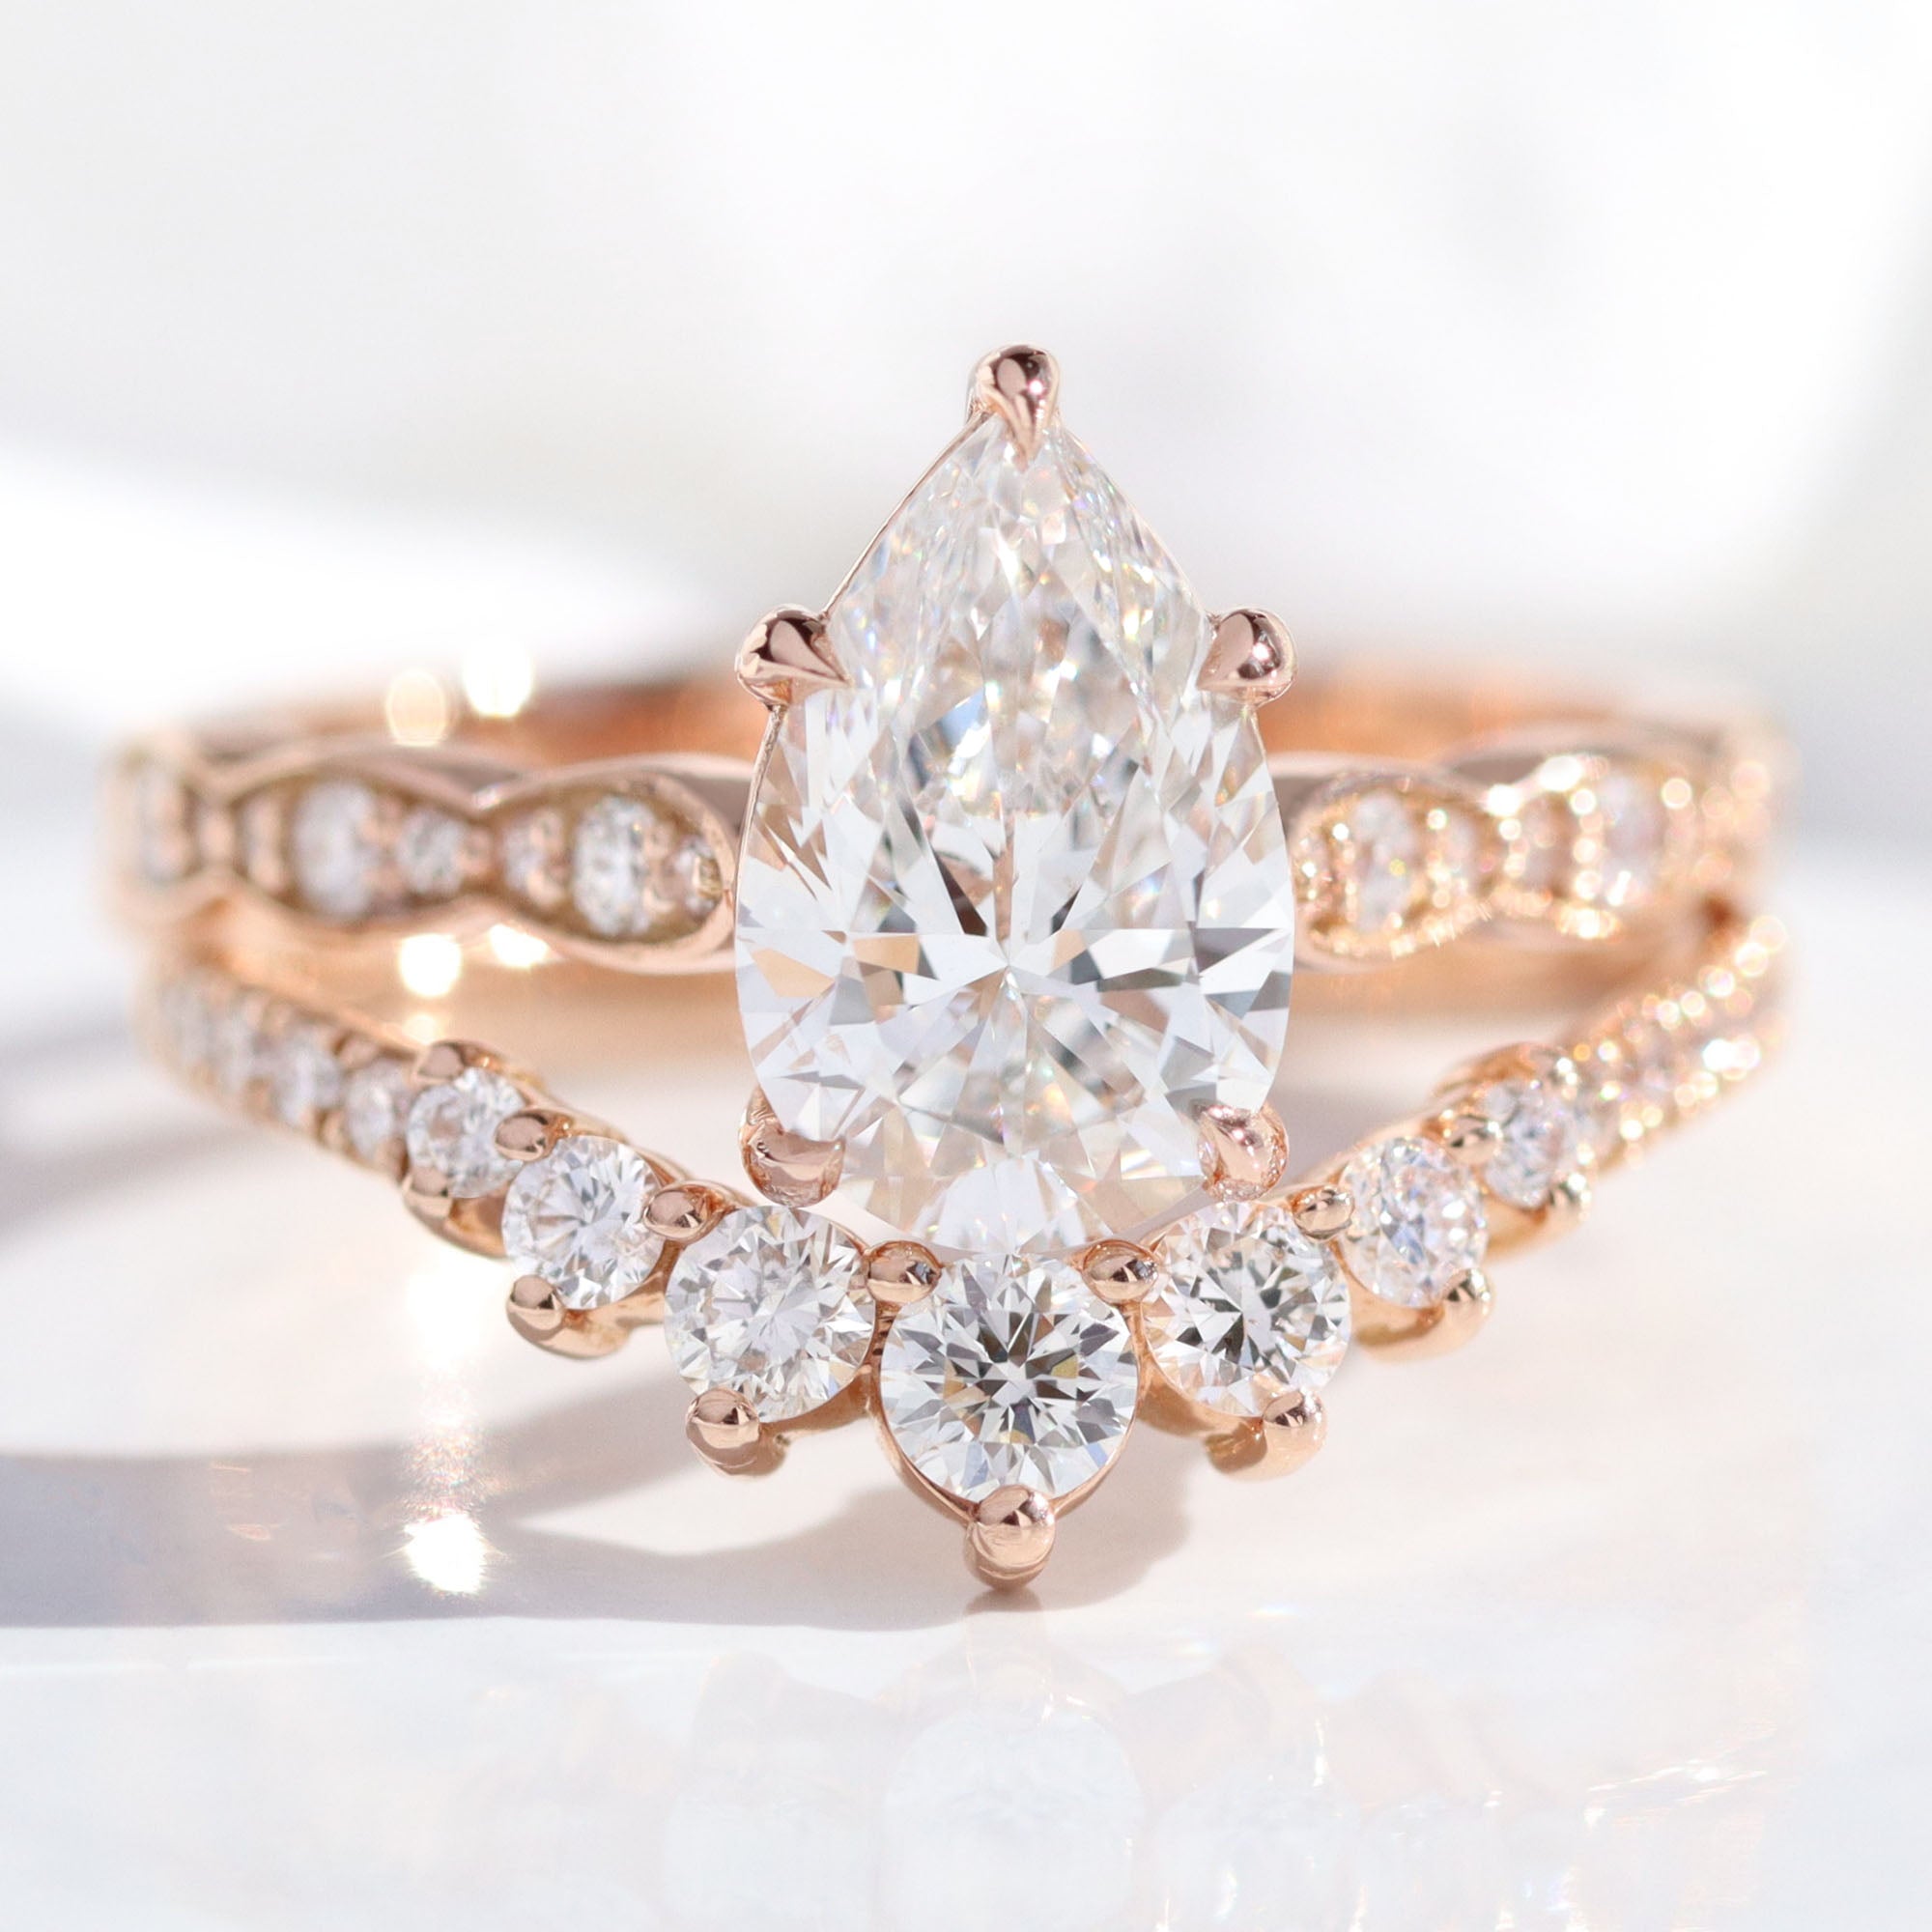 lab diamond ring stack rose gold pear diamond solitaire engagement ring set La More Design Jewelry